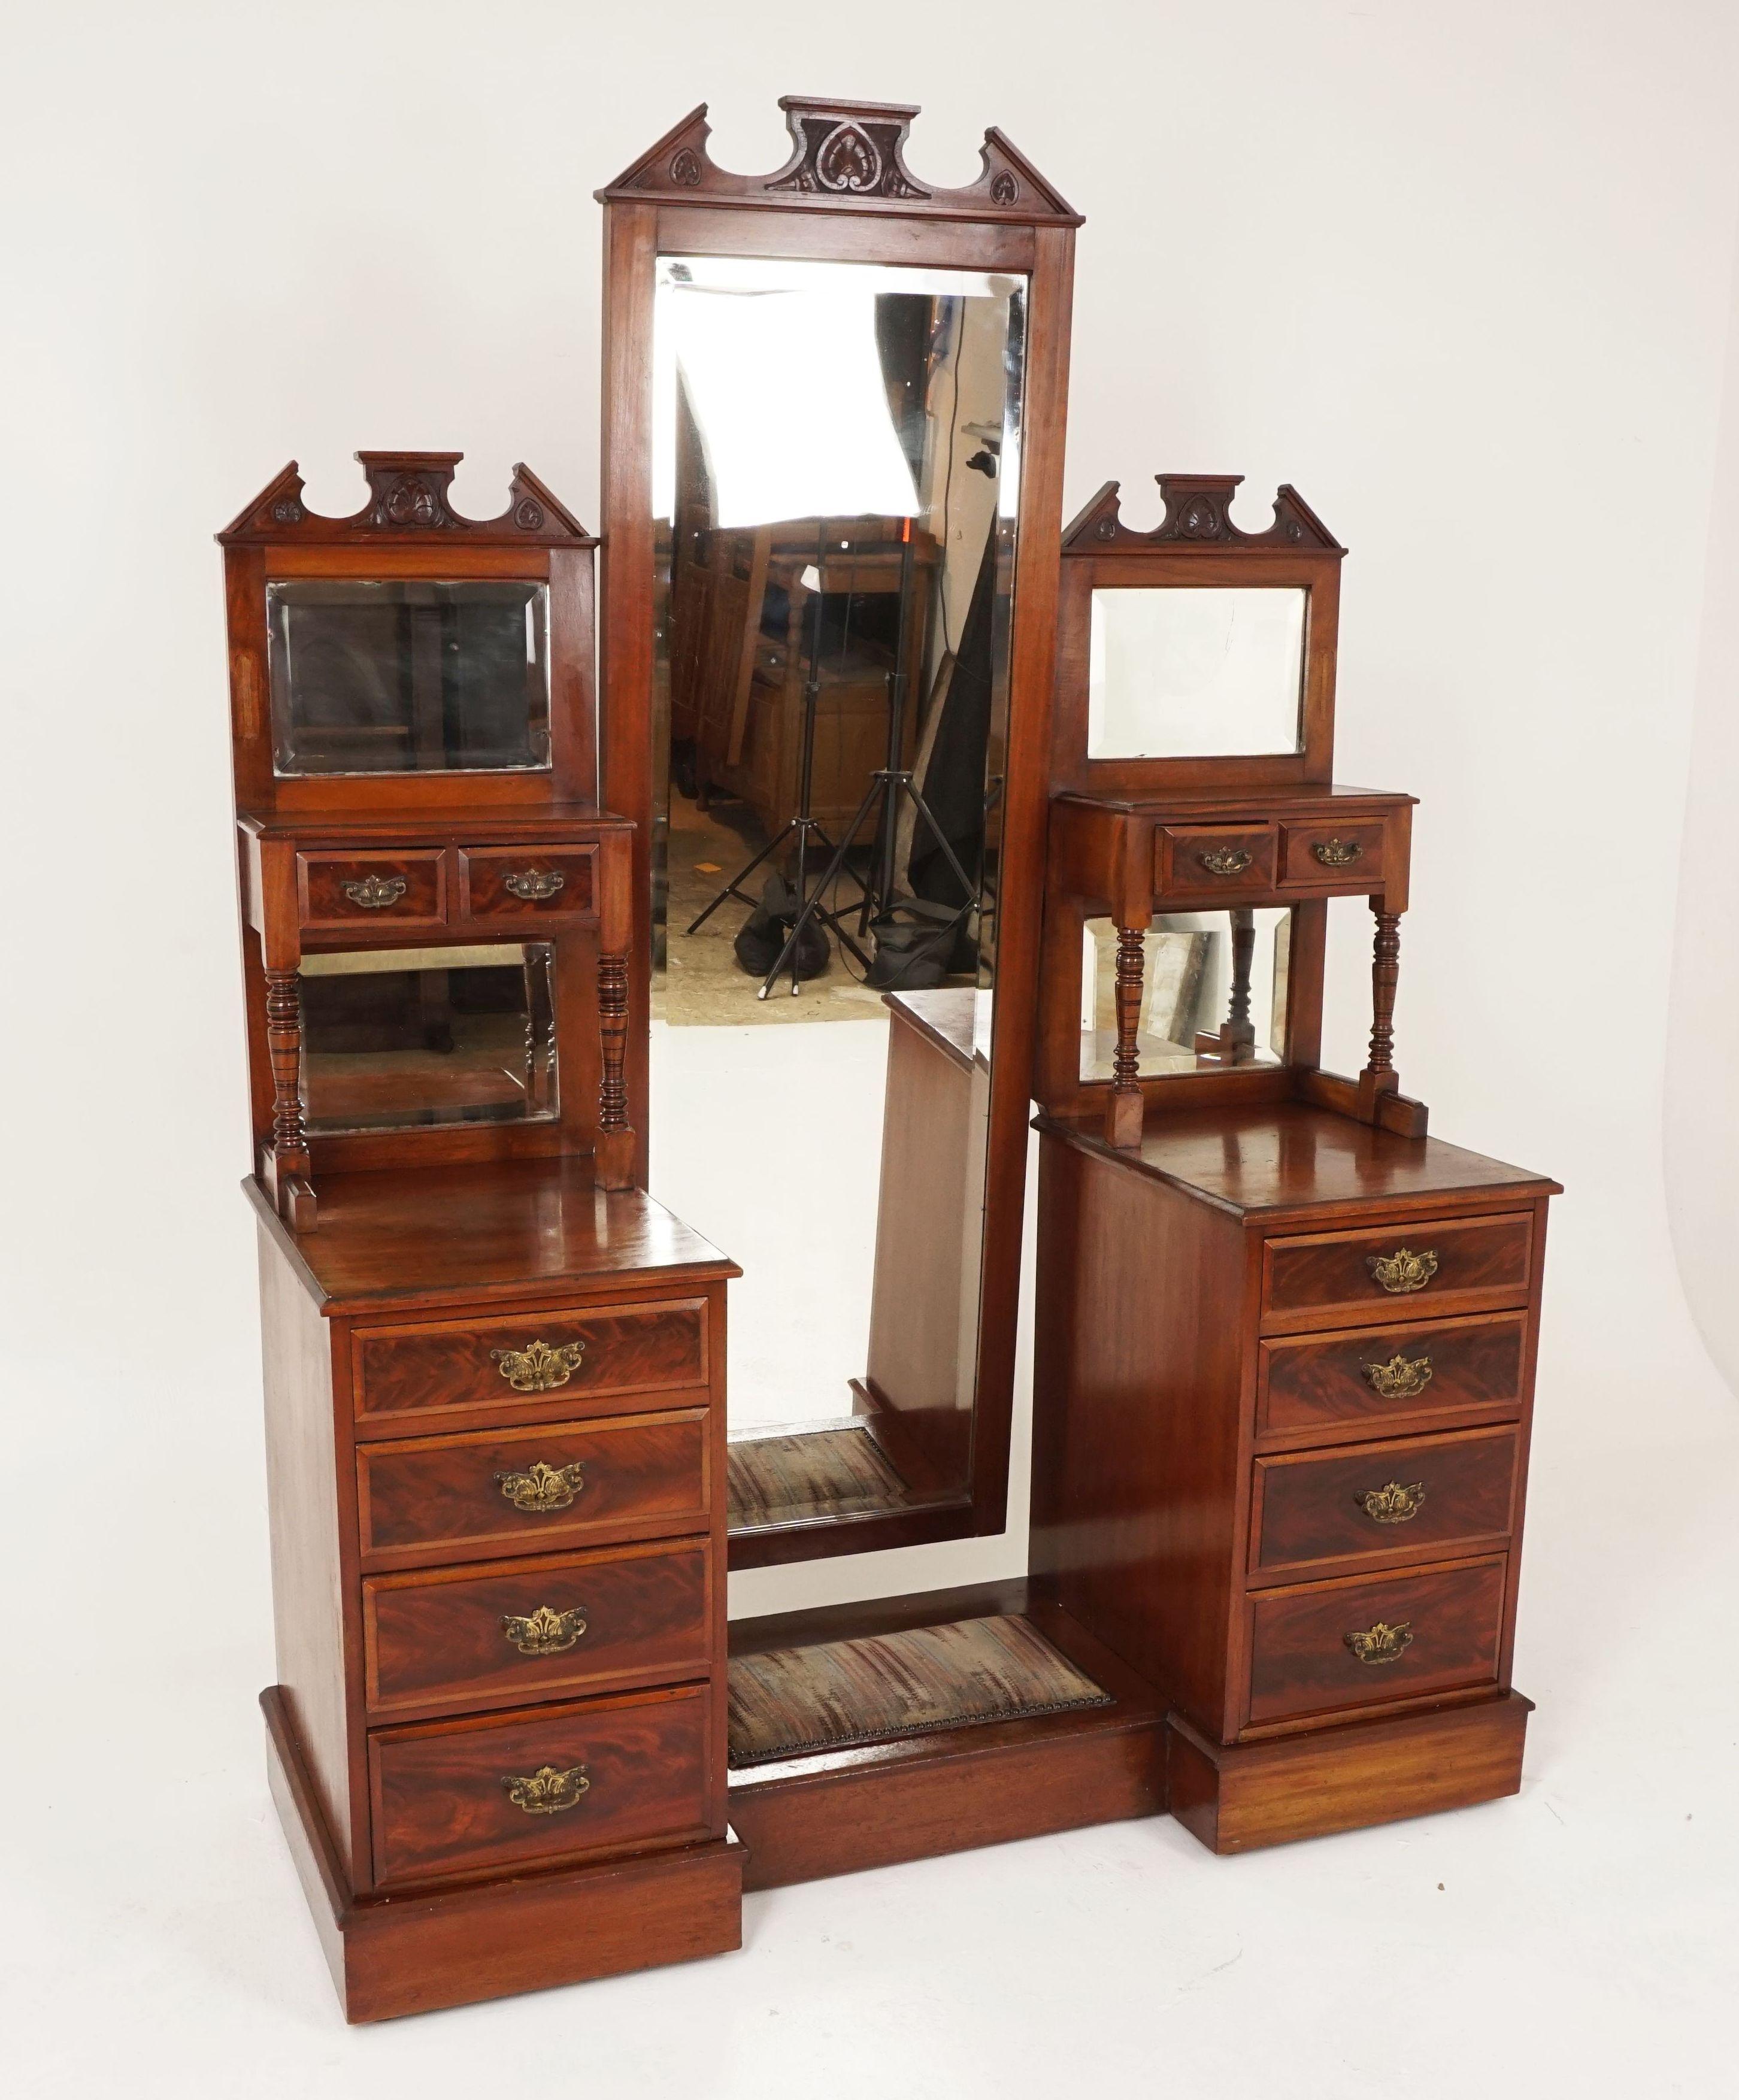 Antique Victorian Walnut cheval mirror vanity dressing table, Scotland 1880, B2356

Scotland, 1880
Solid Walnut
Original finish
Tall full length cheval mirror to the center
Flanked by a pair of mirror back stands with a pair of dovetailed jewelry